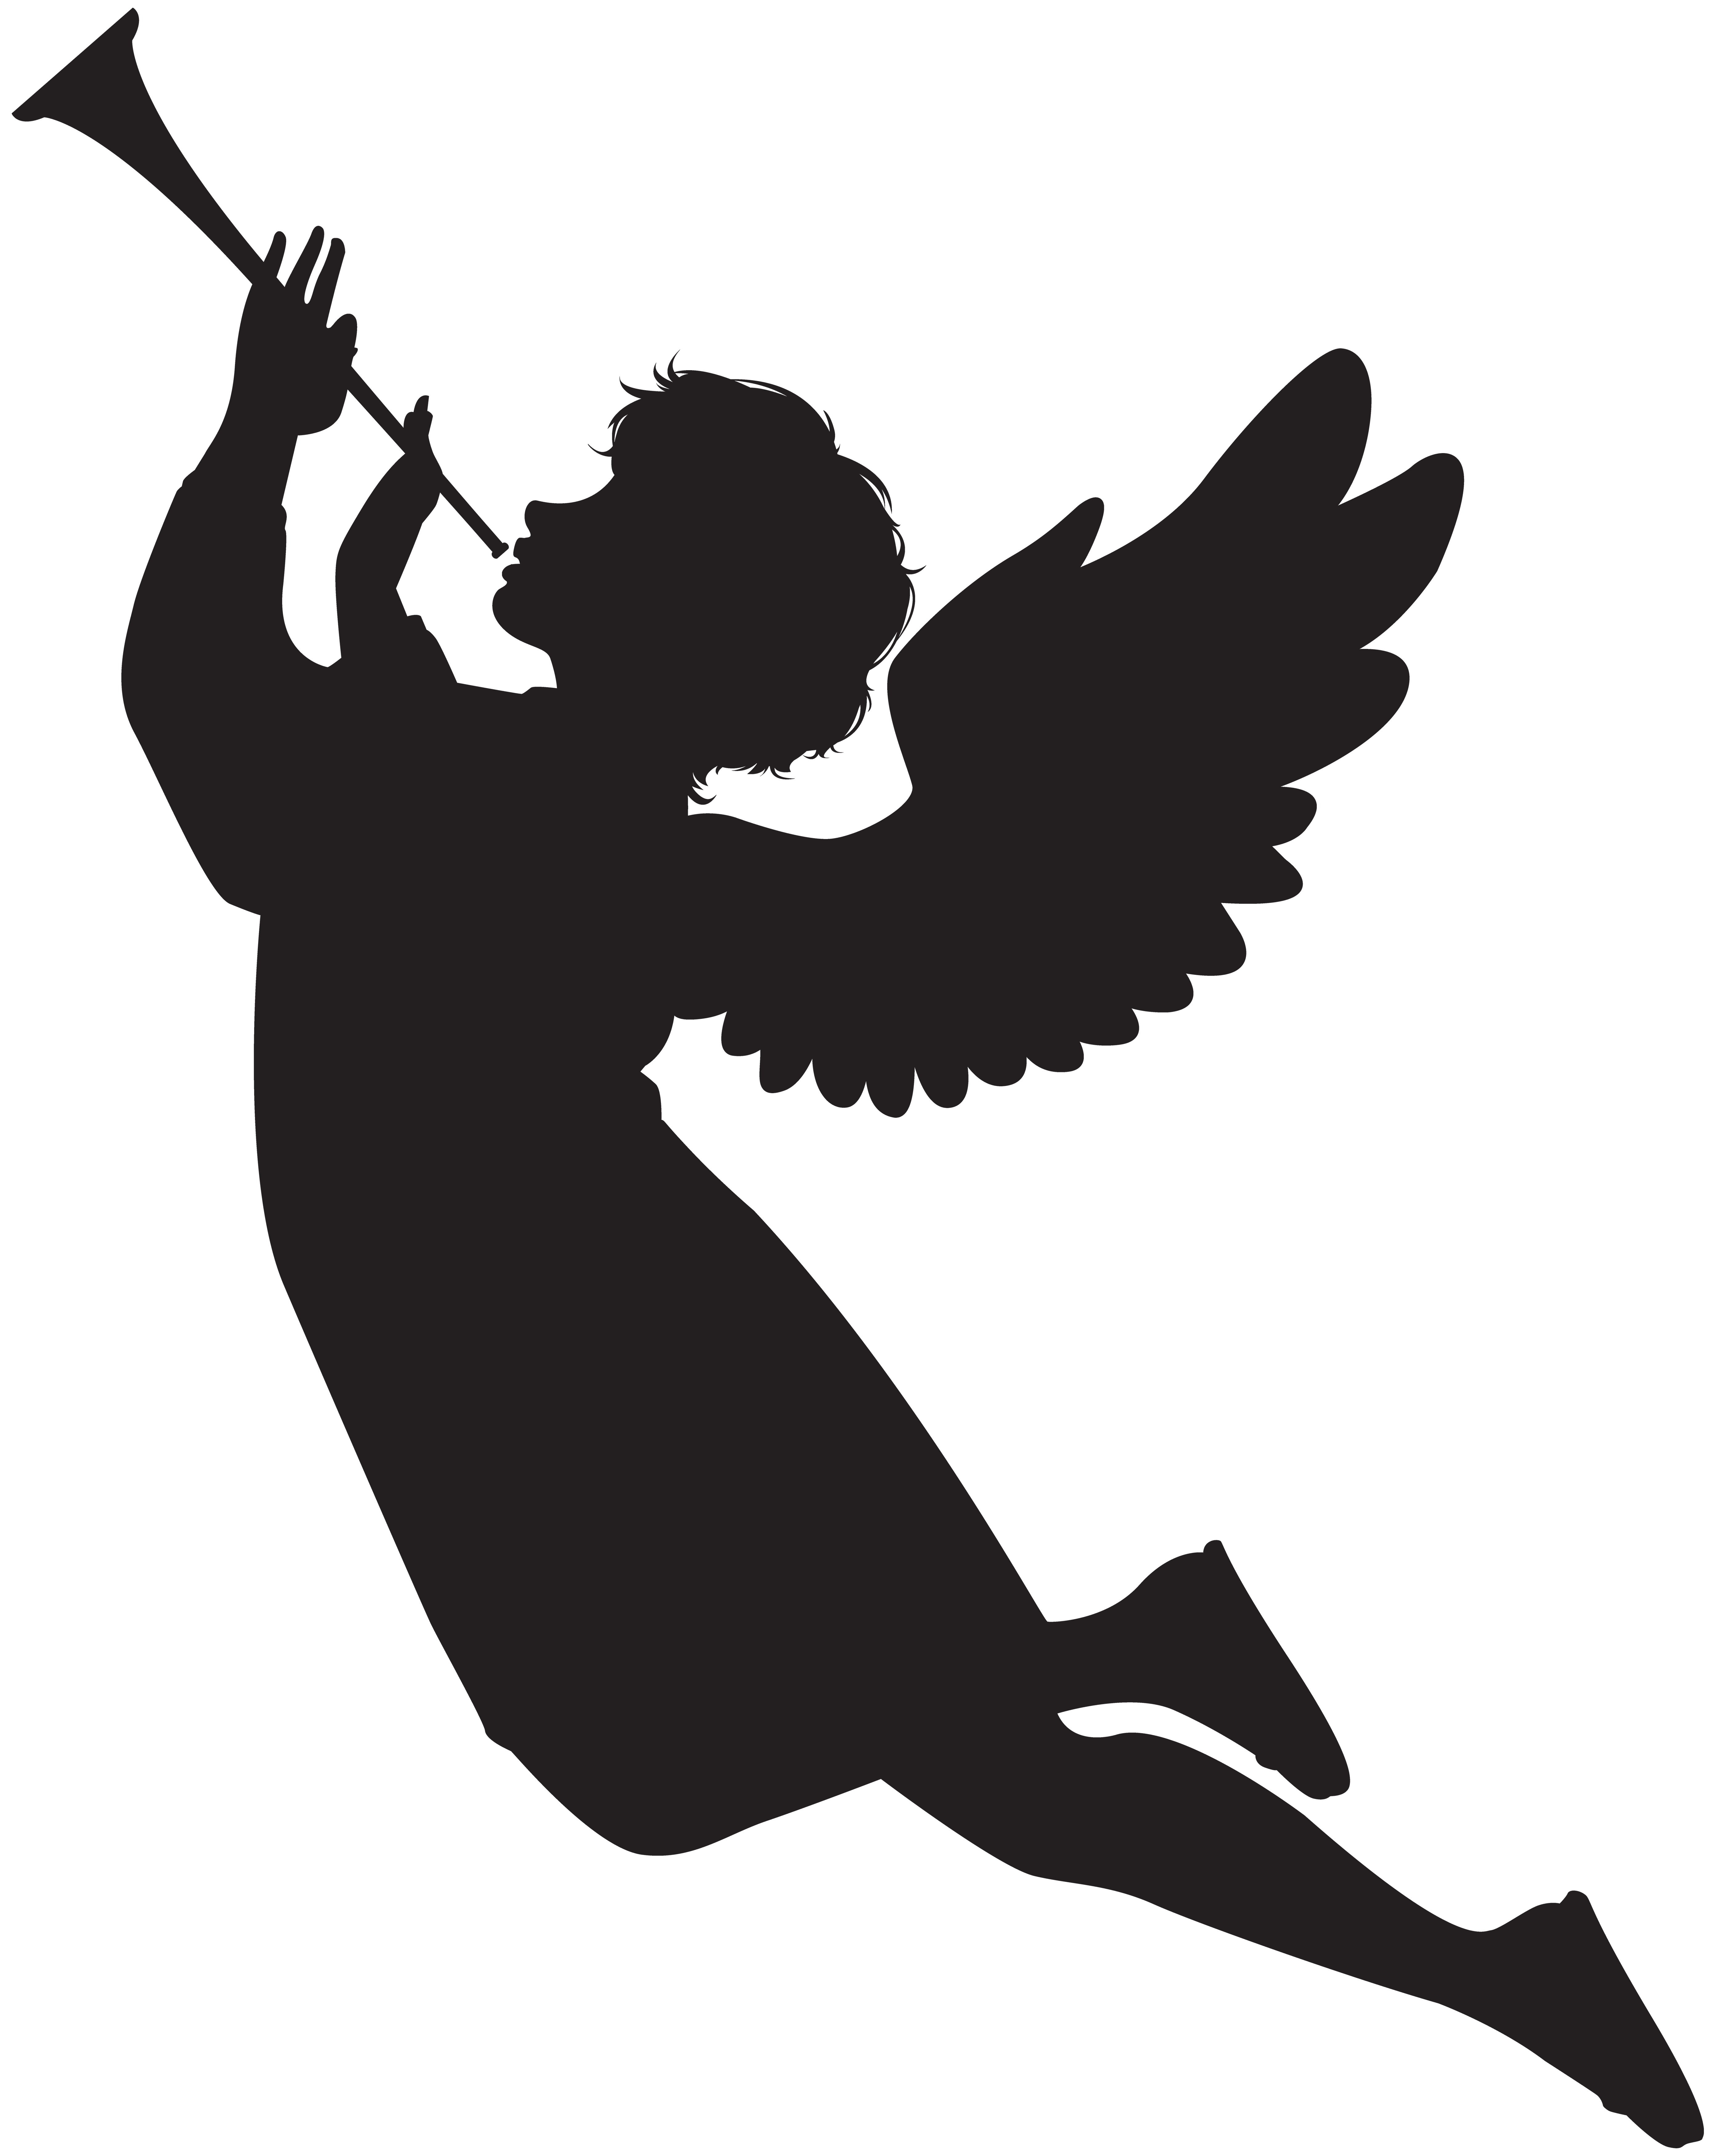 Angel clipart silhouette